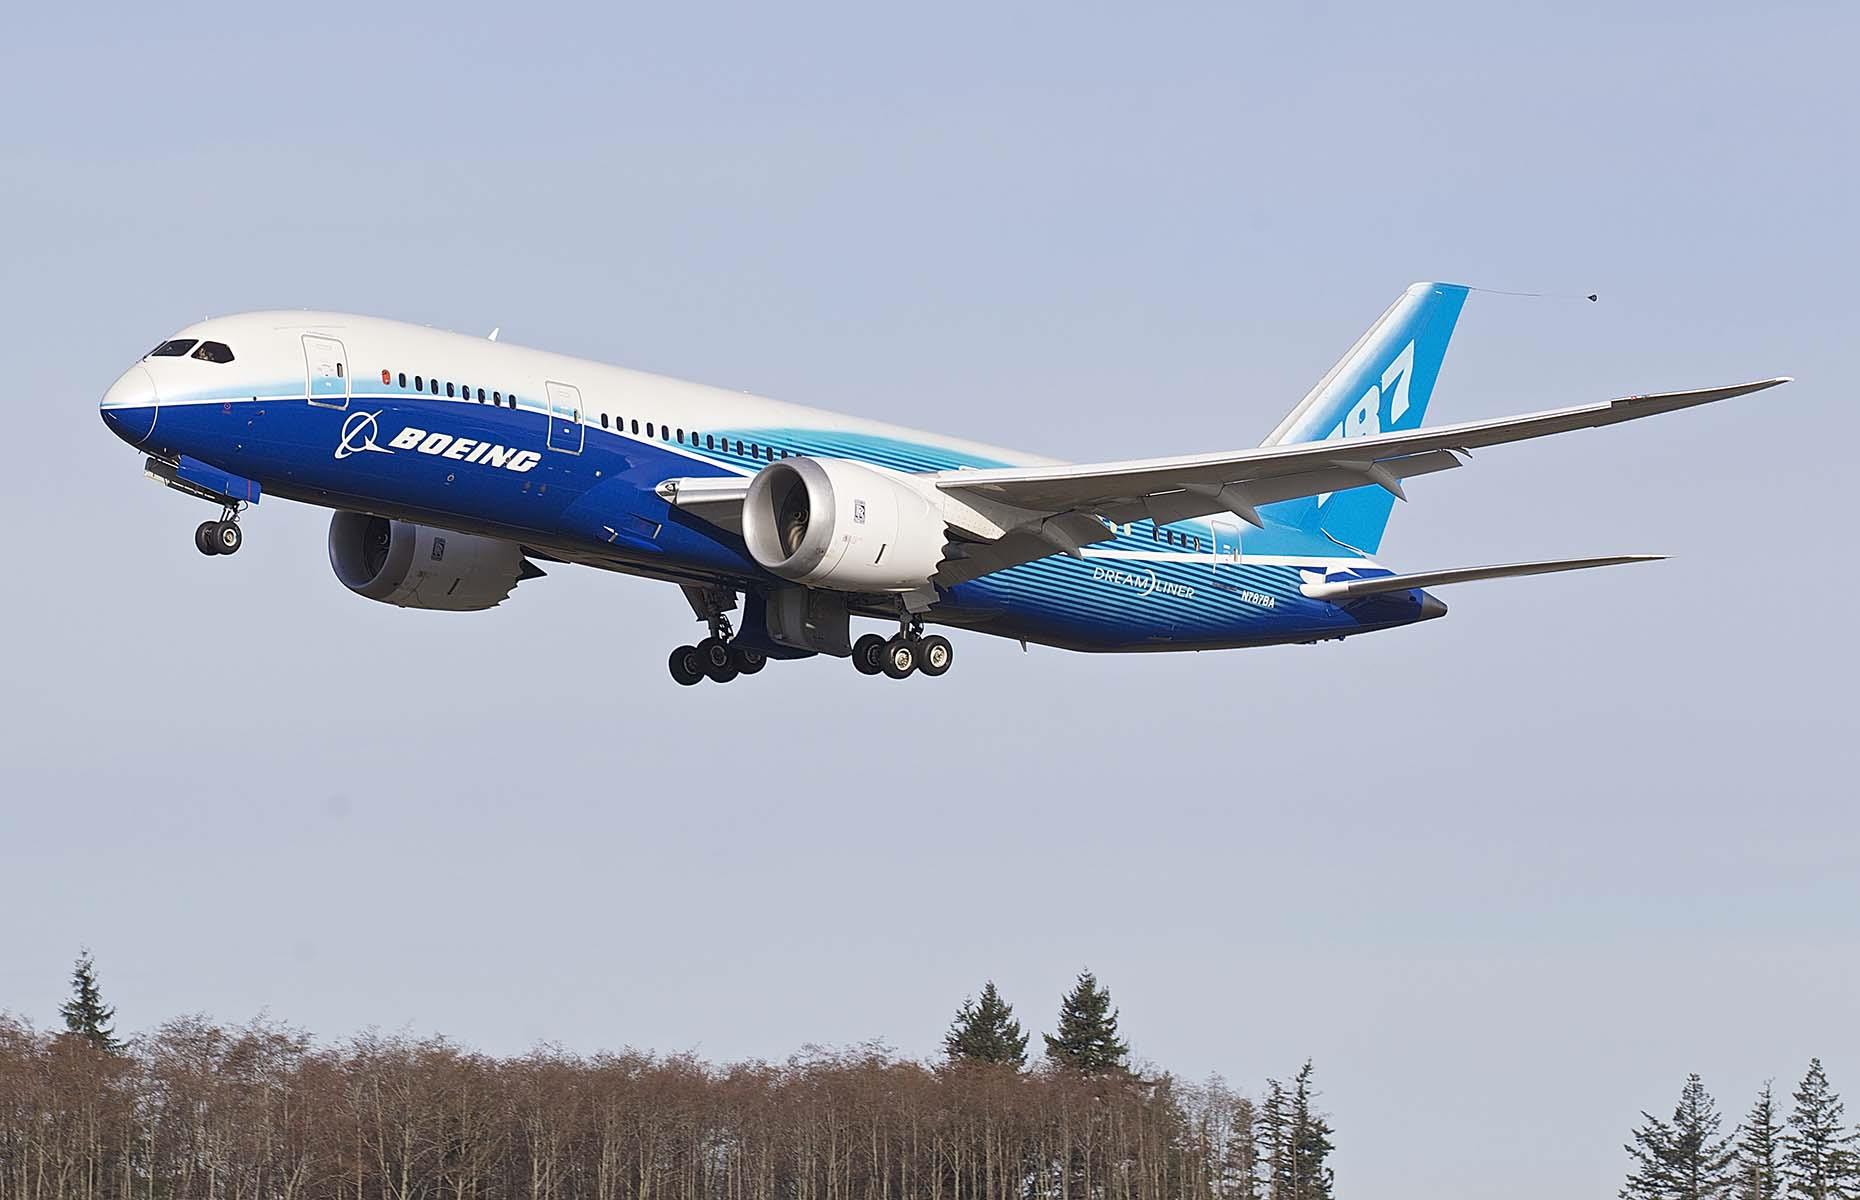 The prototype of Boeing's 787 airliner rolled out in 2007 with 50 initial orders from All Nippon Airways. After Boeing dropped its Sonic Cruiser project (which was intended to rival Concorde), all hands were on deck to develop a wide-body jet airliner that focused on efficiency and, although some development issues led to a series of cancelled orders, it's now outperformed the A380 and become the long-haul aircraft of choice.